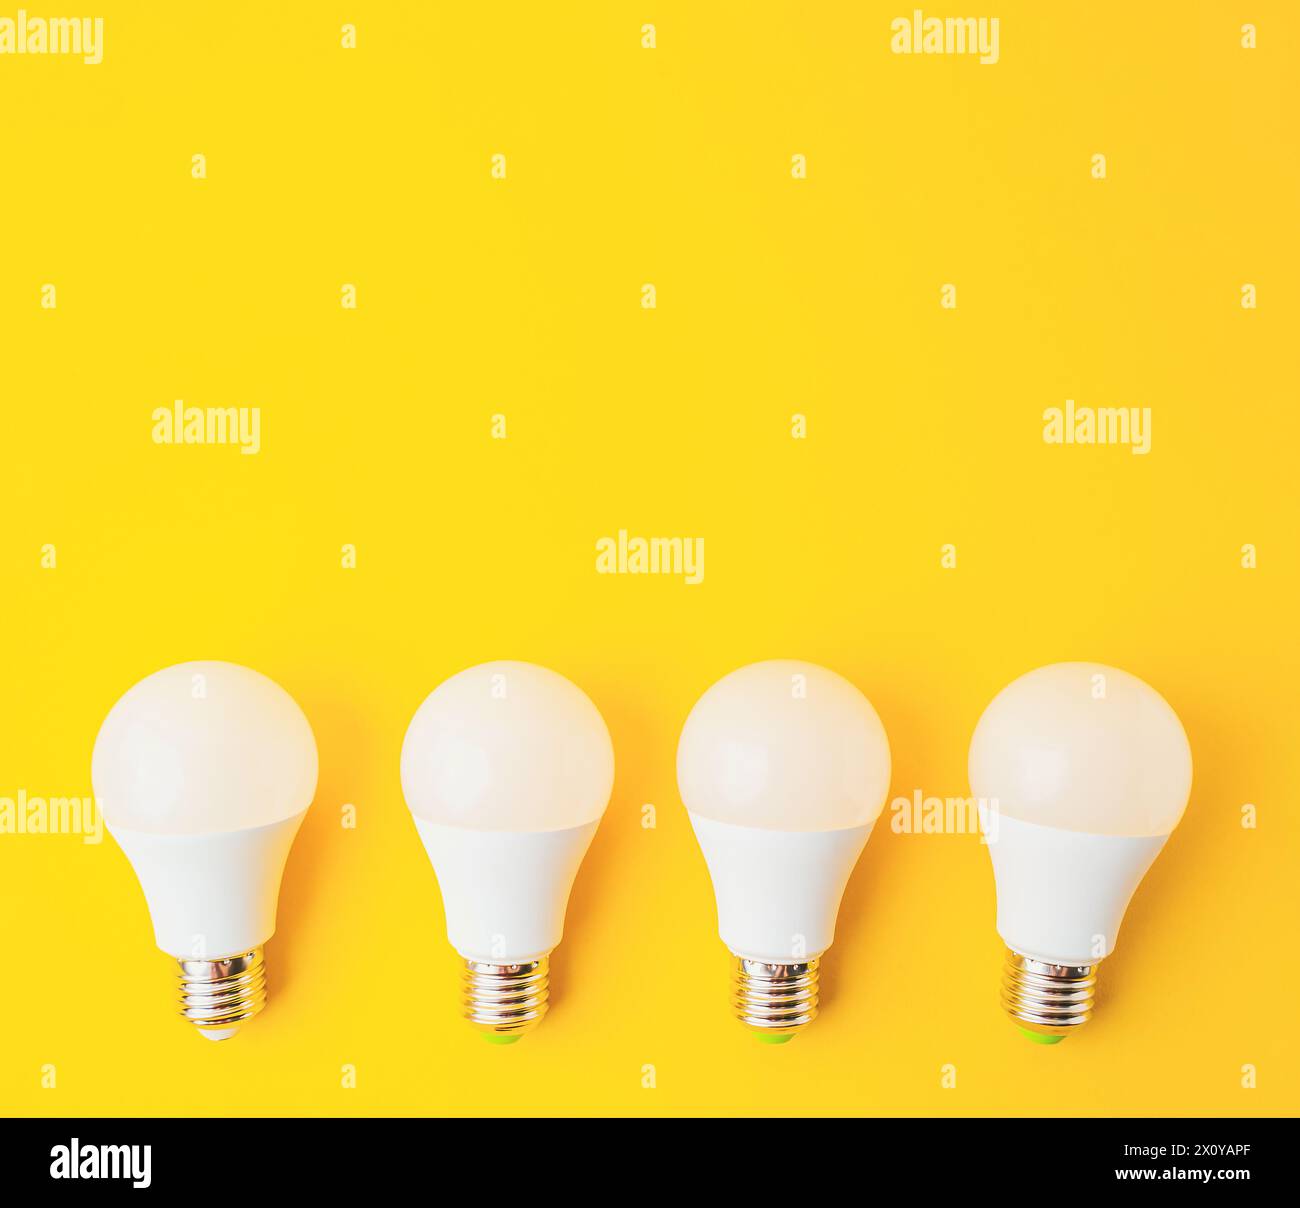 Four white light bulbs are arranged on a yellow background. The bulbs are all the same size and shape, and they are evenly spaced out. Concept of unif Stock Photo